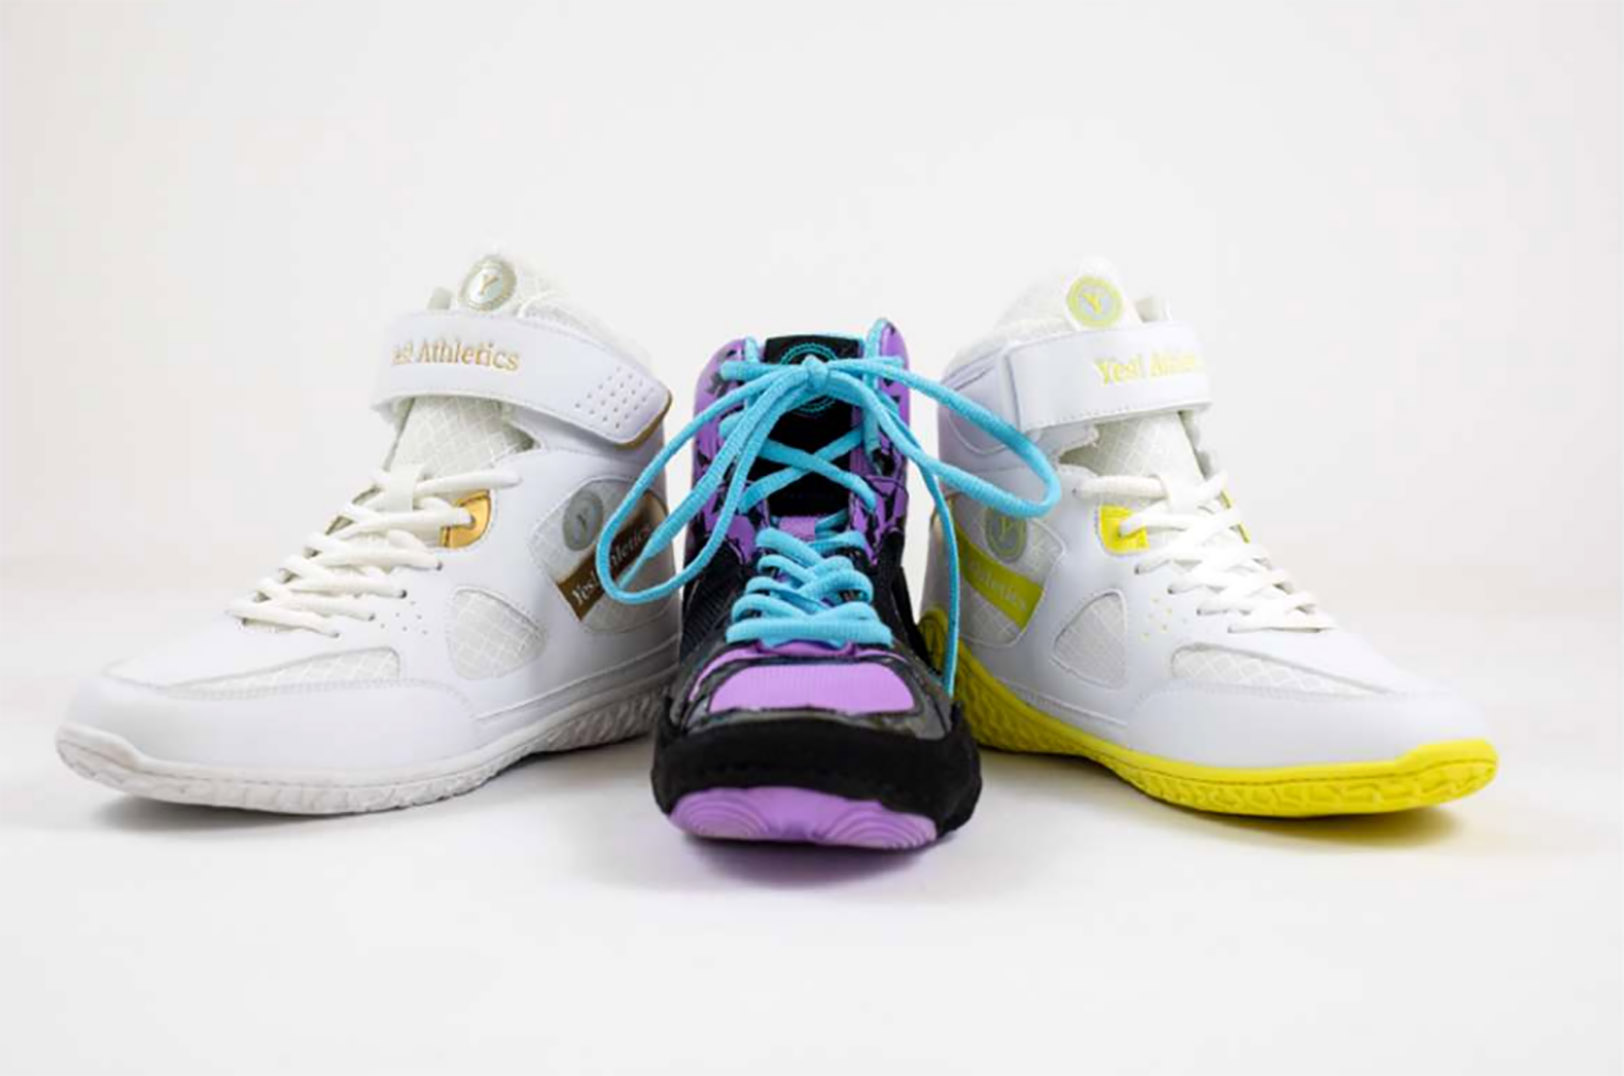 Fund Me, KC: Maker of first girls wrestling shoe launches new feat — a pair for the champions